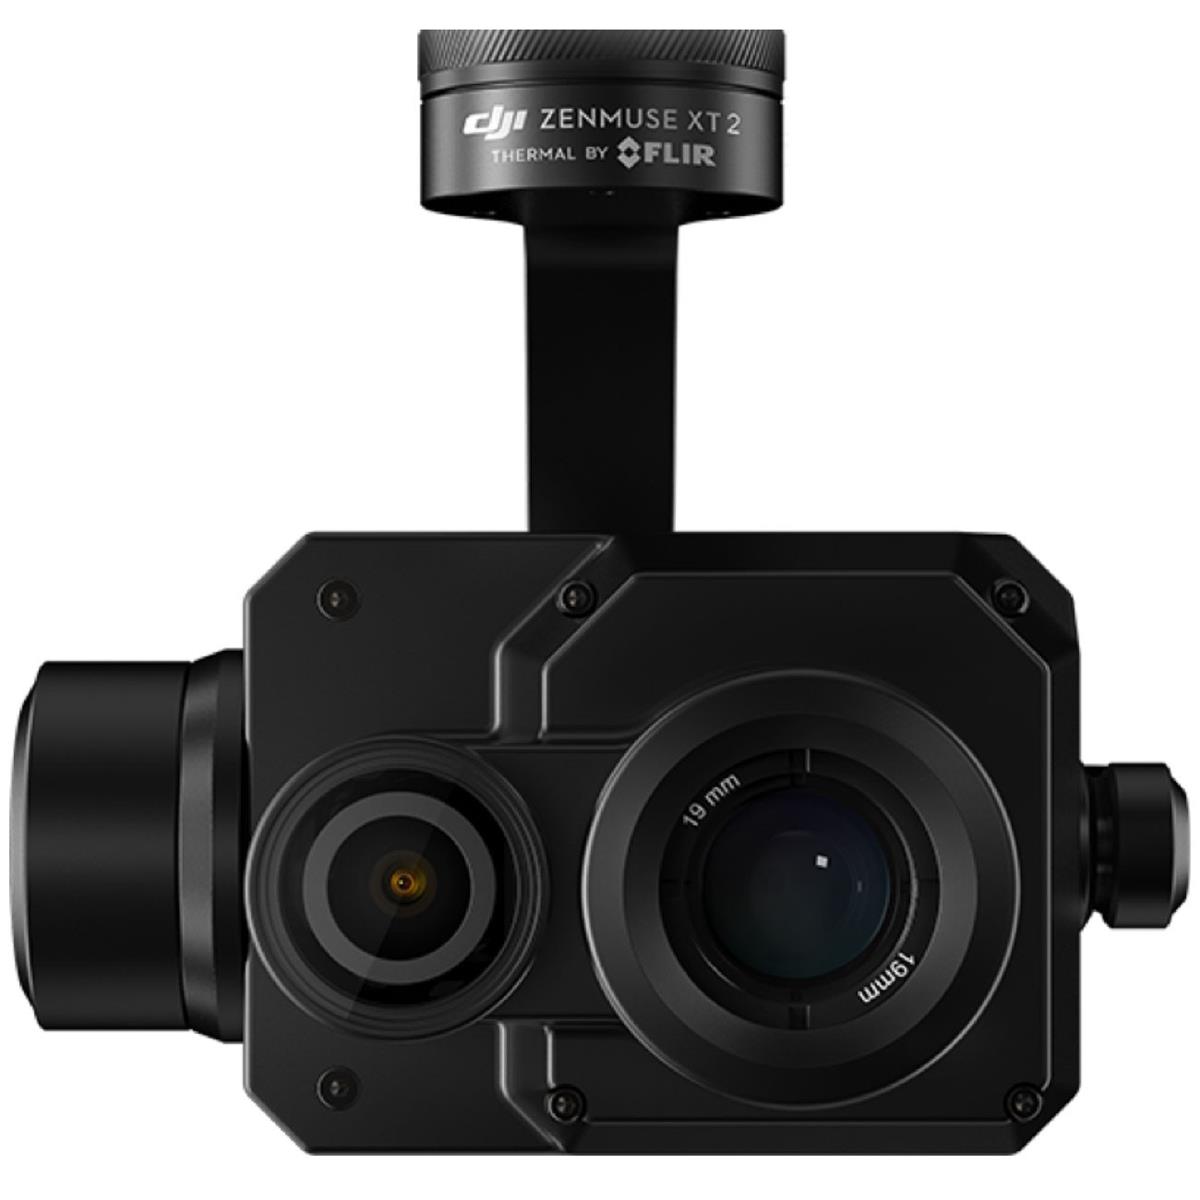 Image of DJI ZENMUSE XT2 Thermal Camera with 19mm Lens